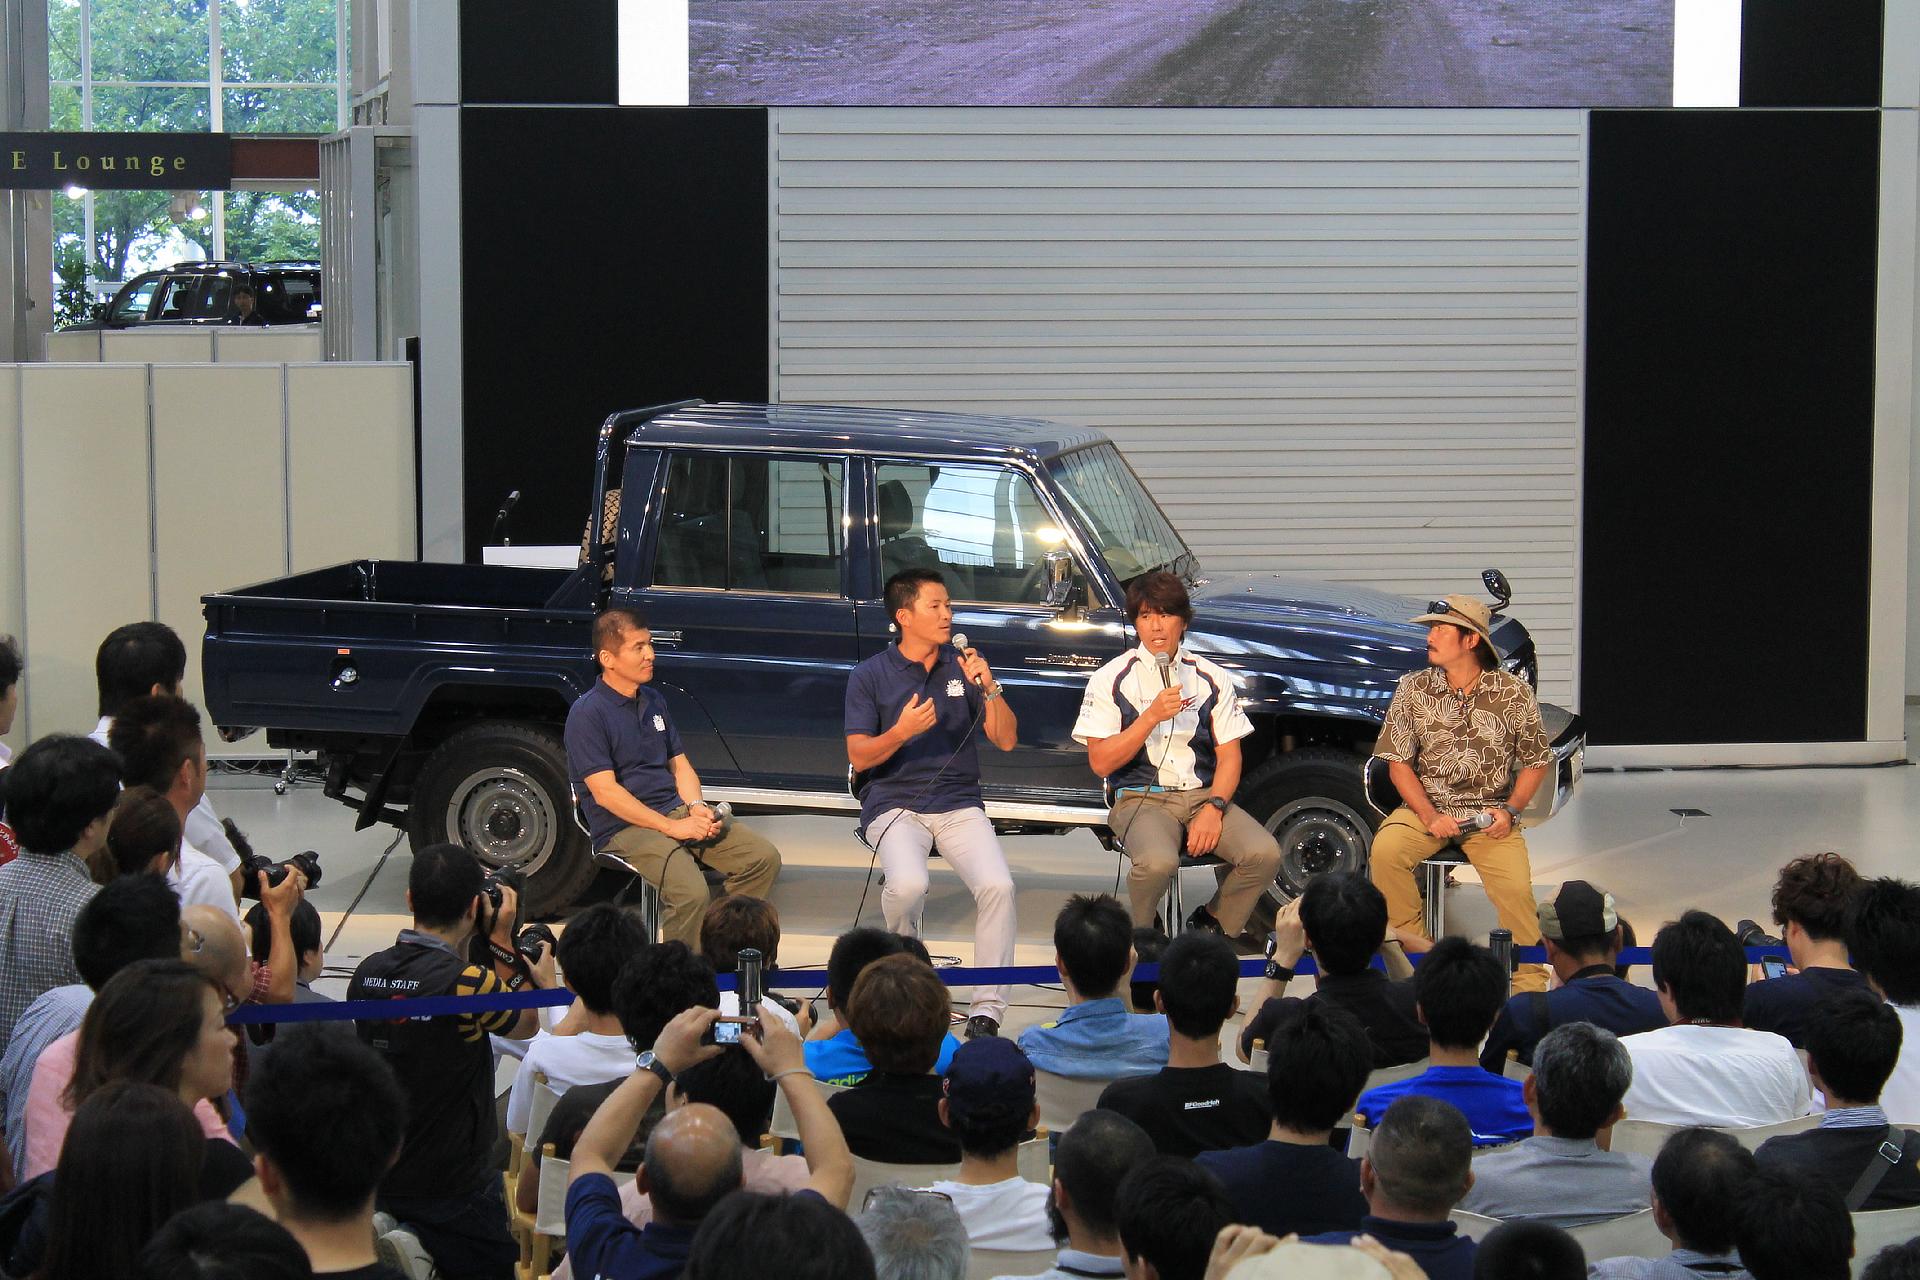 Panel discussion with Land Cruiser enthusiasts